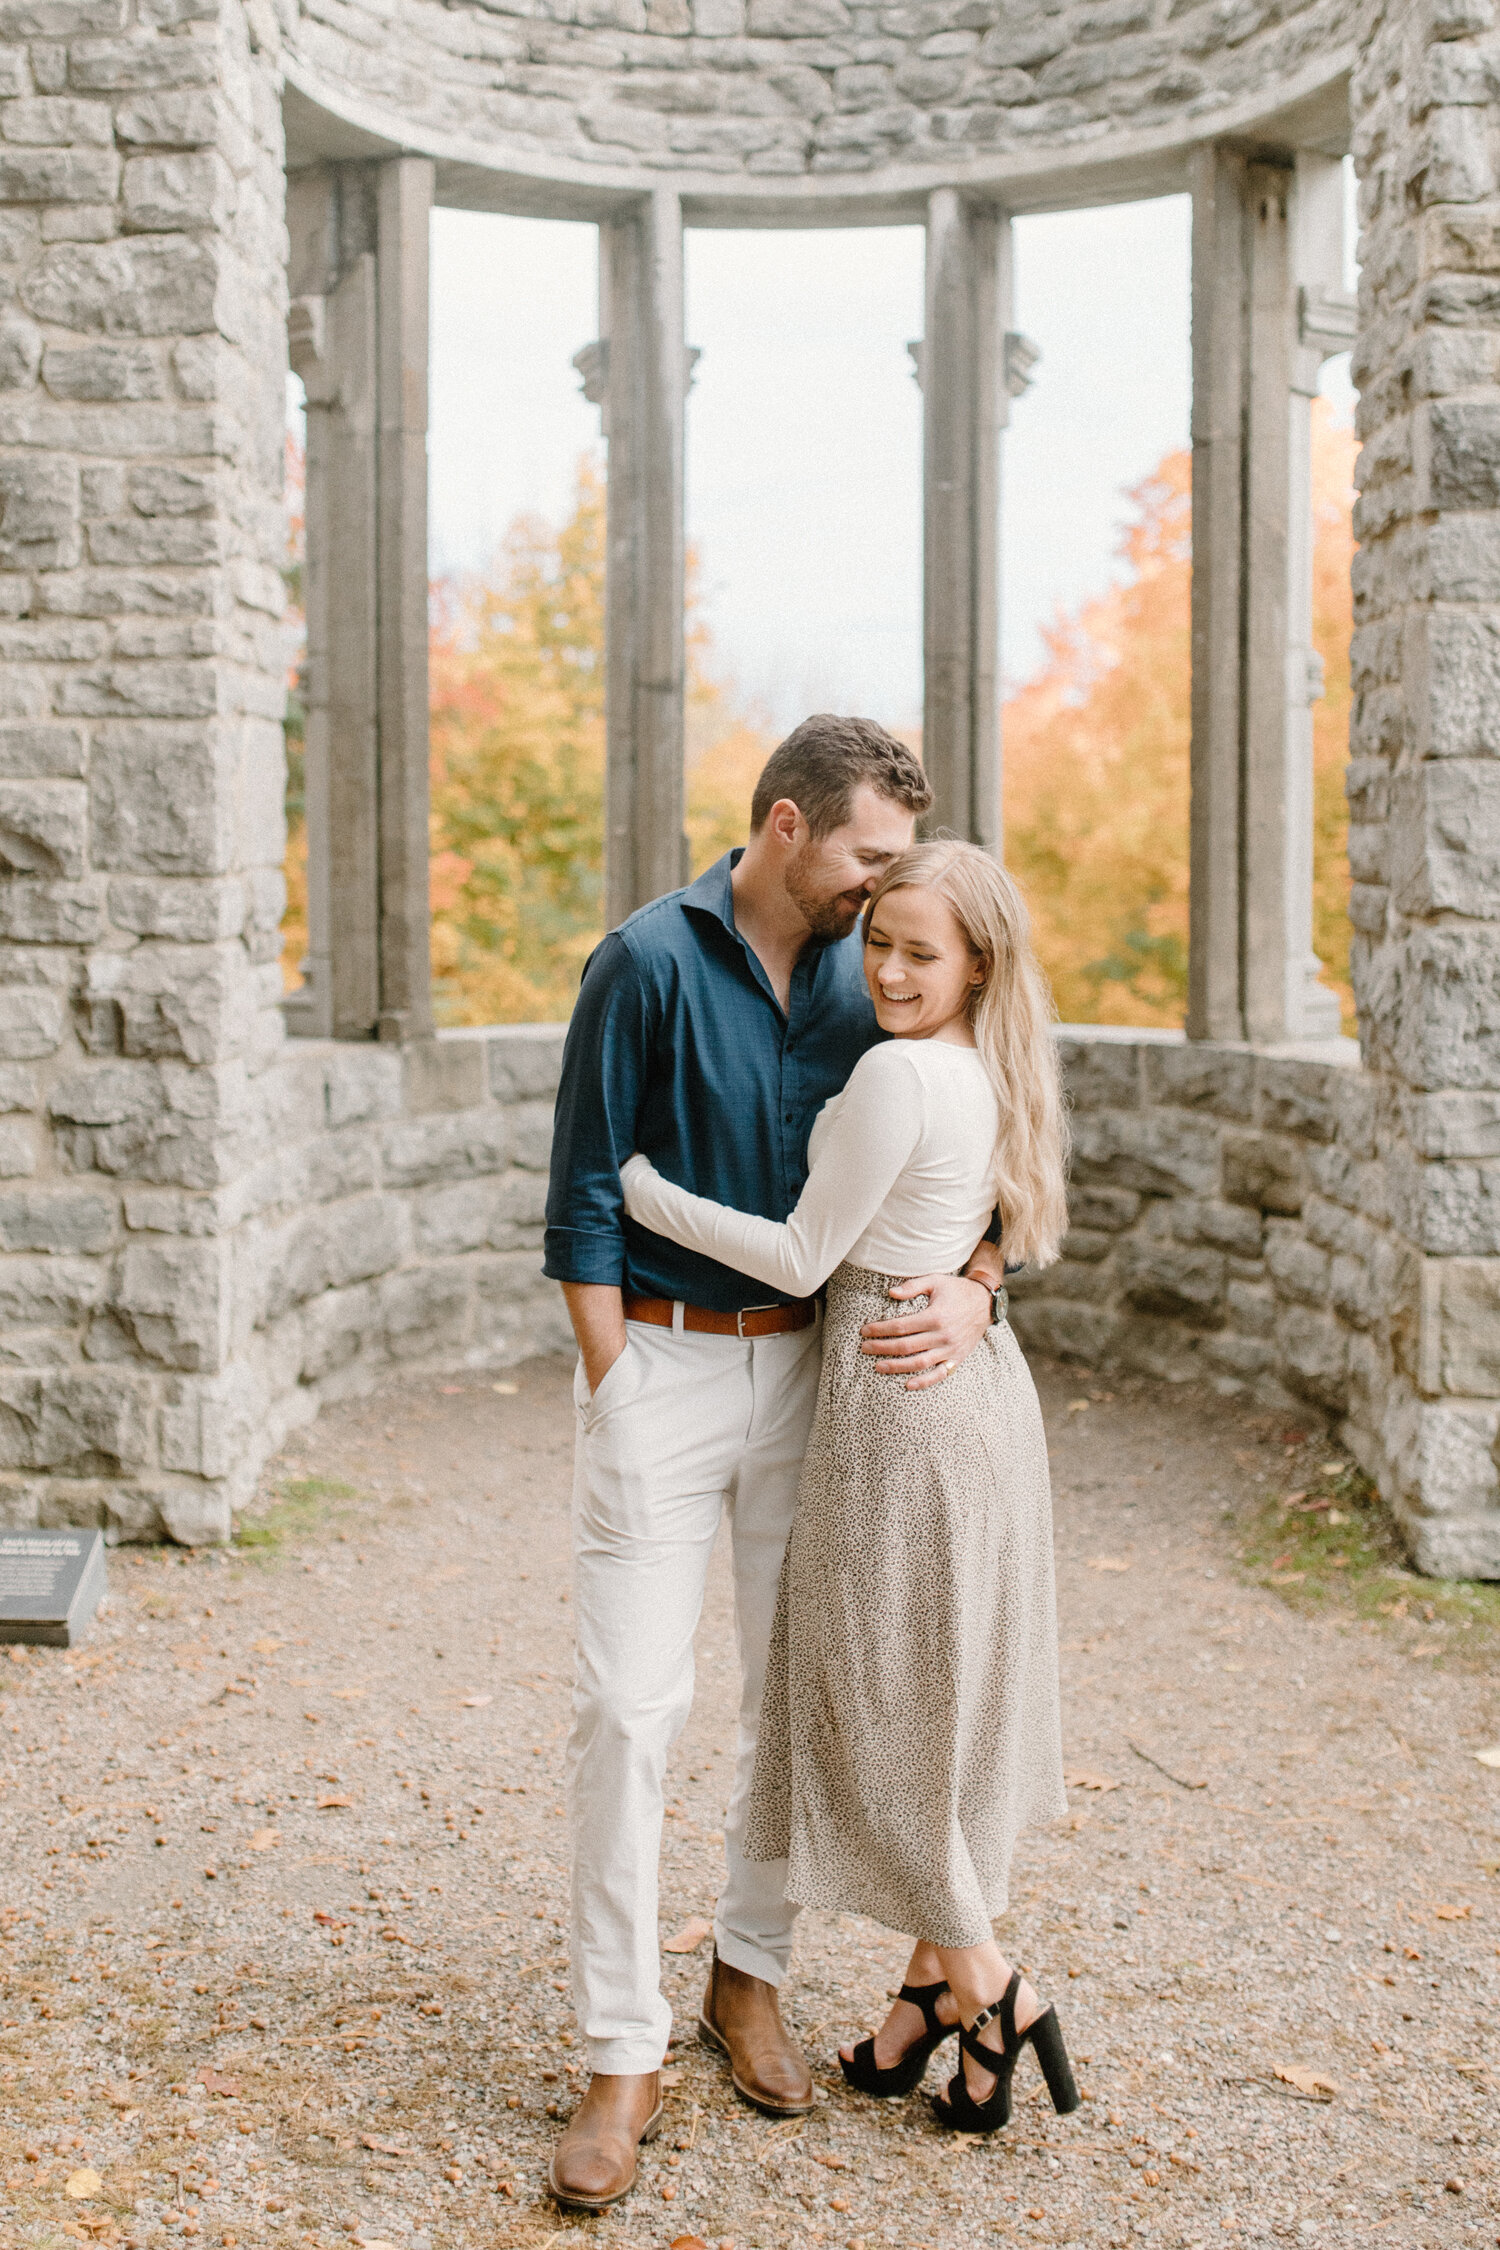  Chelsea Mason Photography captures this engaged couple hugging and smiling romantically at one another during their engagement session in a aged brick gazebo. autumn quebec canada engagement session, engaged couple tenderly hugging, womens black str